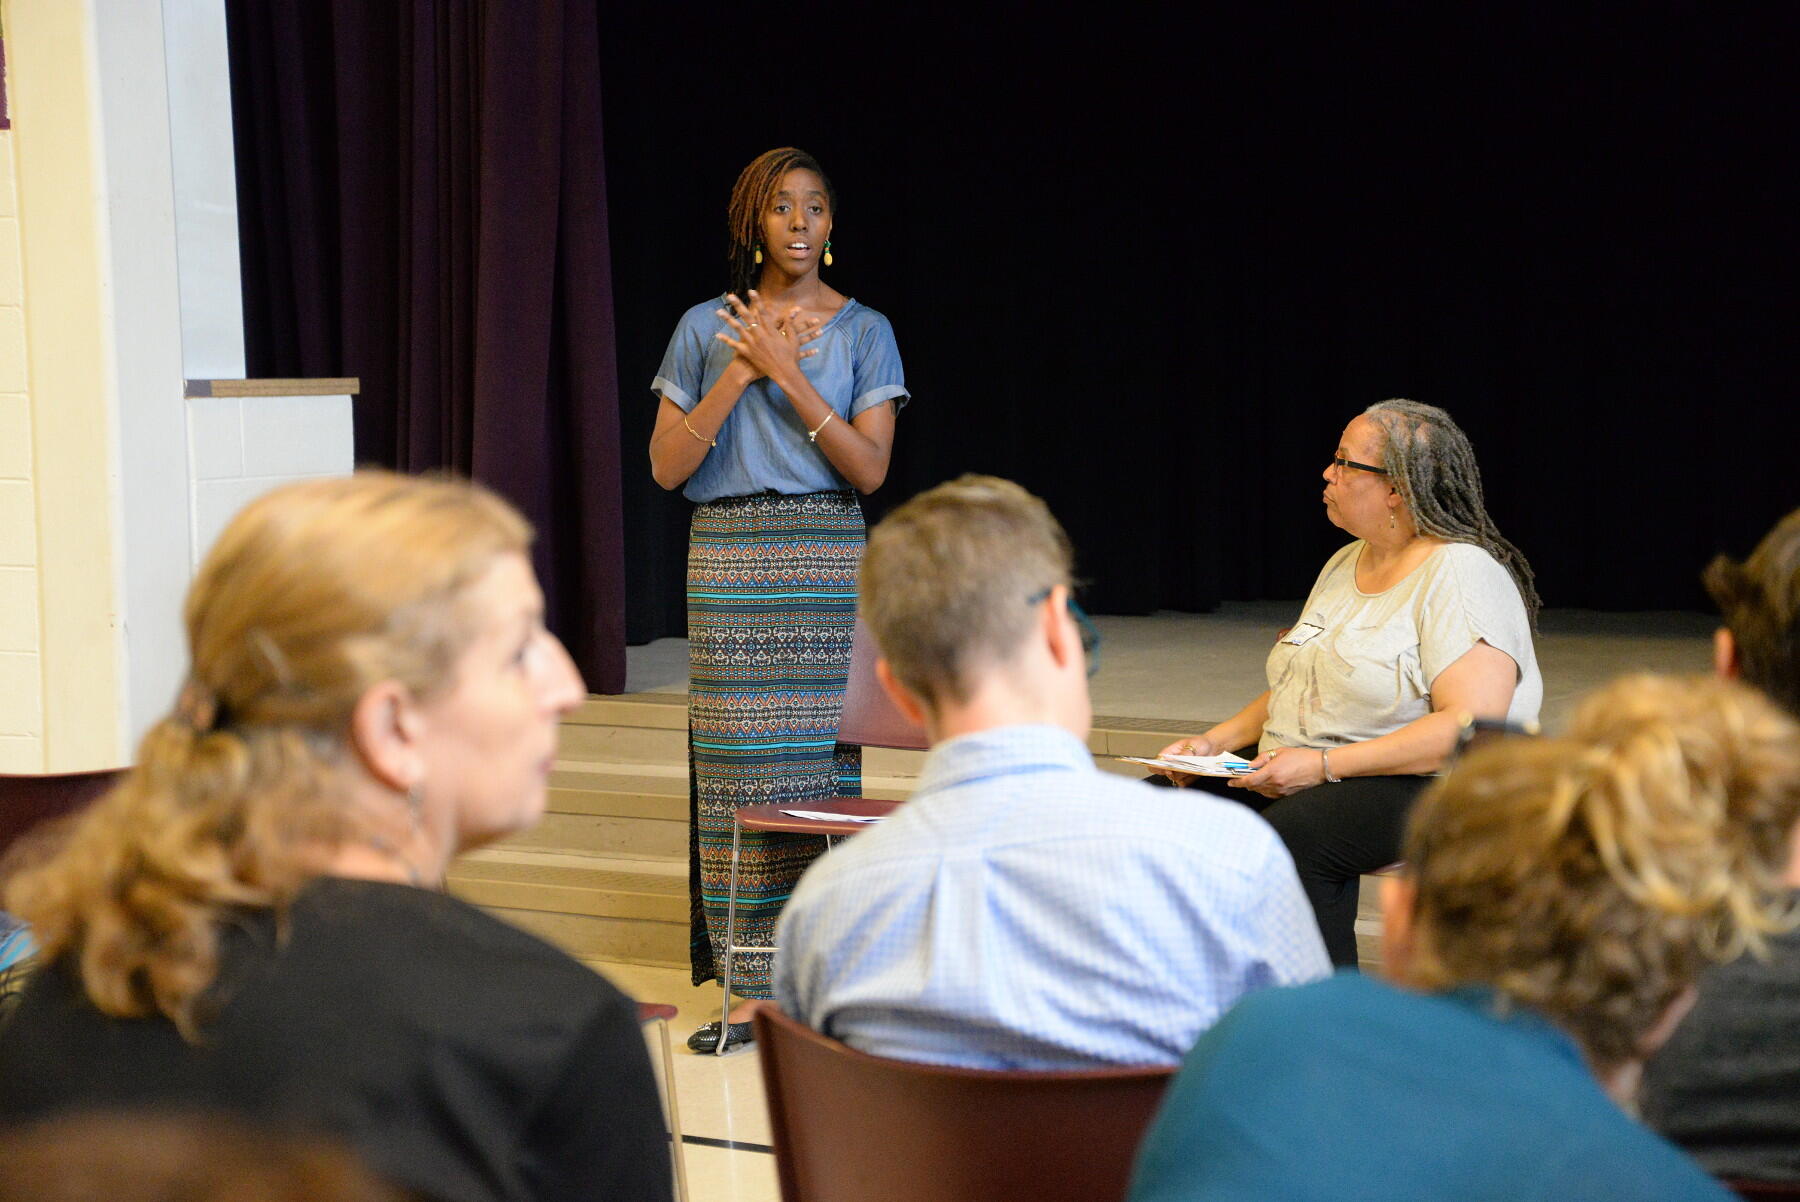 Jacqulyn "Jackie" Washington, an alumna of the School of Social Work and center director of the nonprofit Six Points Innovation Center, and Lillie A. Estes, a VCU alumna and community strategist, spoke with the students at the Peter Paul Development Center in the East End.